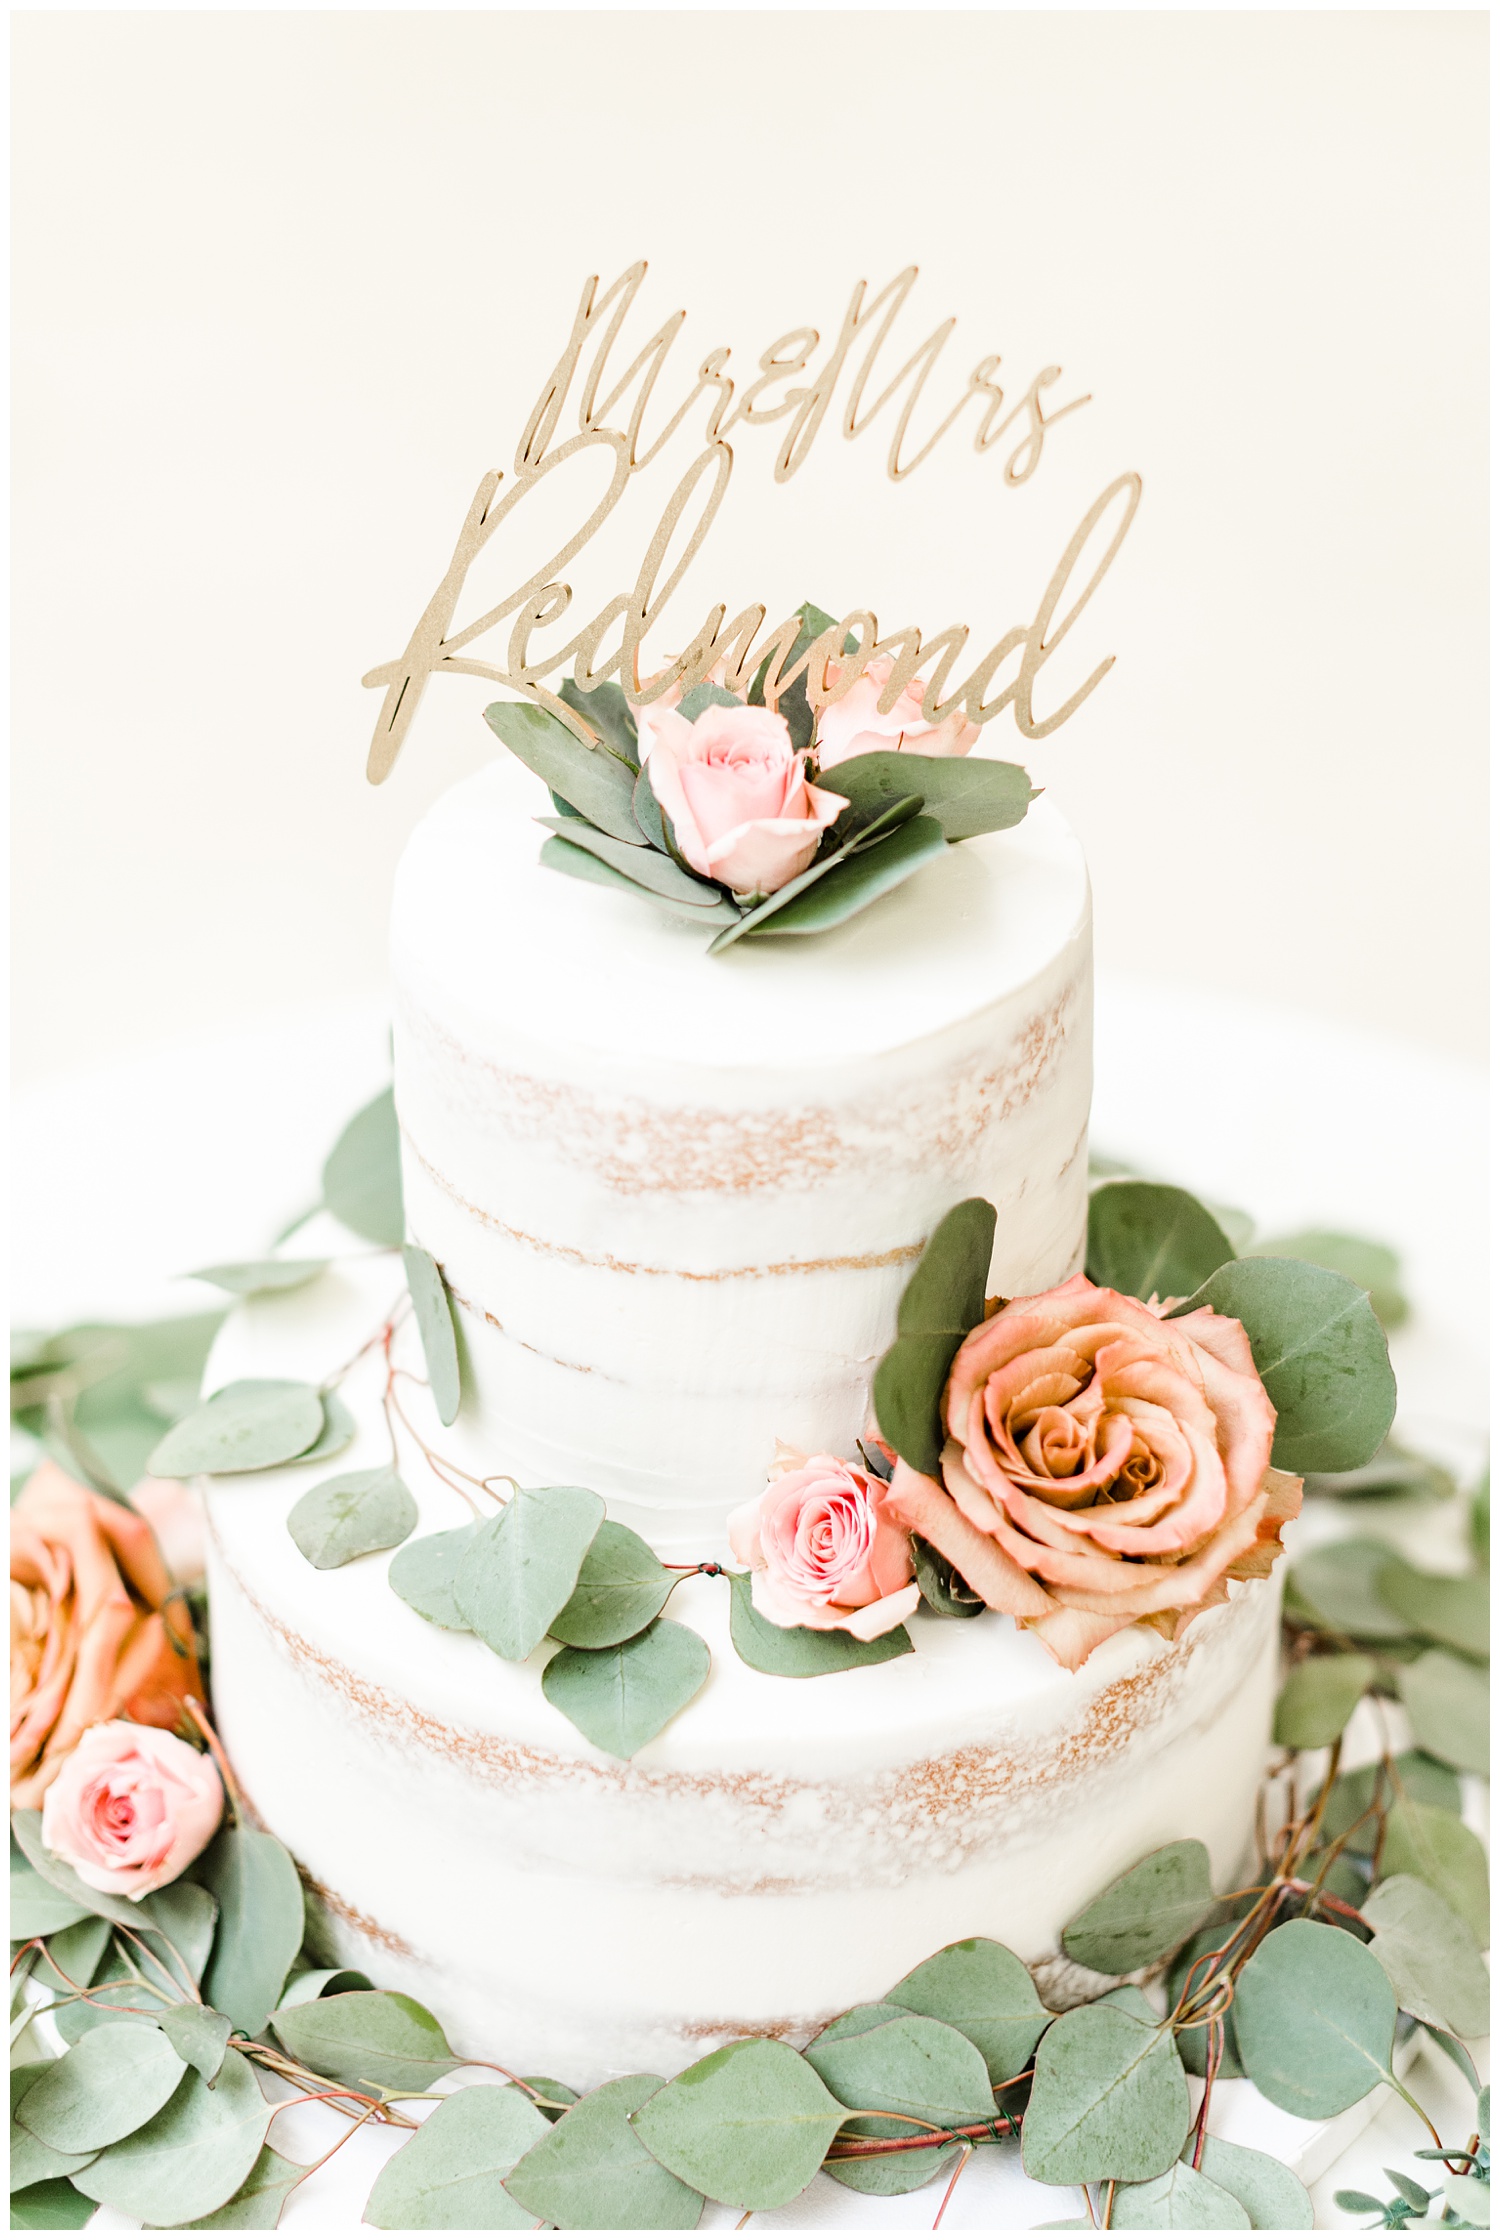 Naked wedding cake adorned with light pink and dusty orange roses as well as eucalyptus and a custom Mr. & Mrs. Redmond cake topper | CB Studio